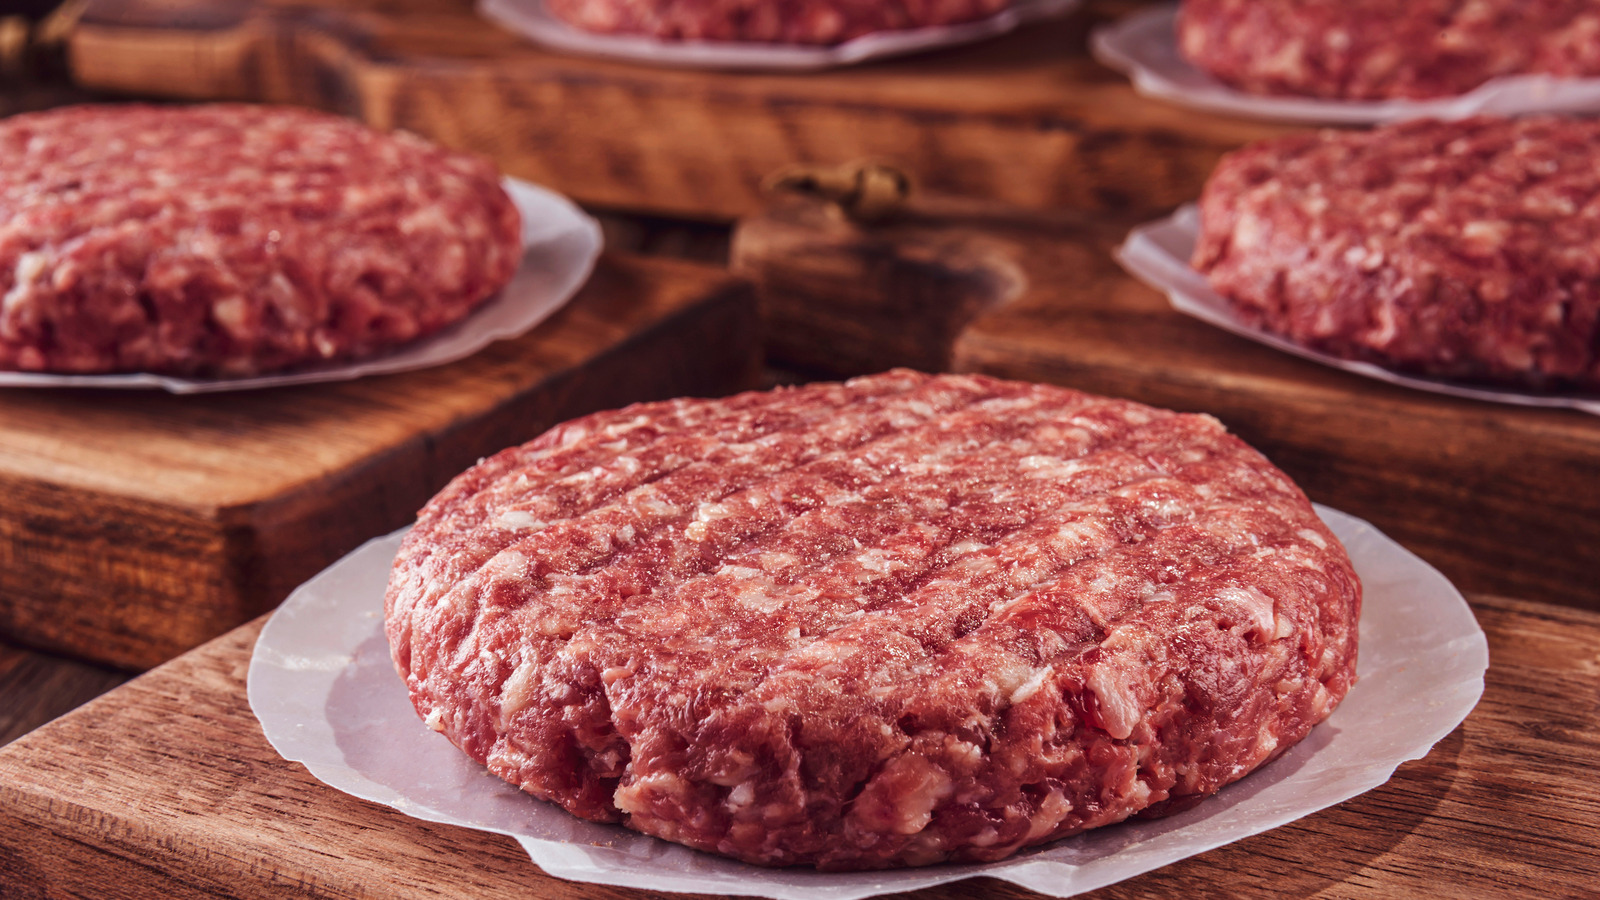 Reports Of 'RubberLike' Contaminant Prompt Ground Beef Recall